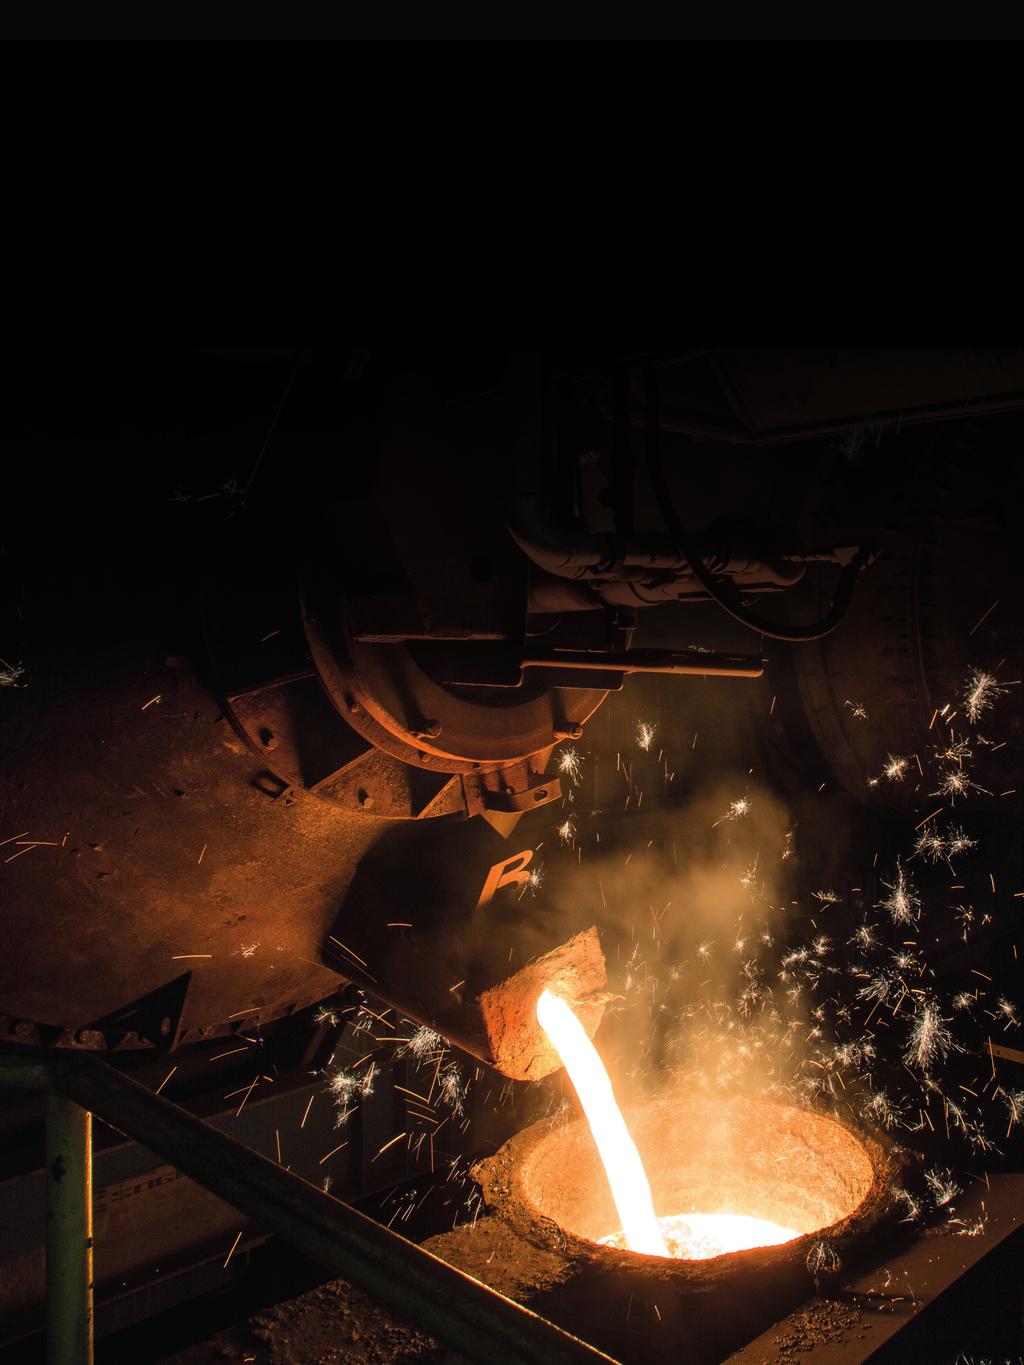 Dovre, Cast Iron Foundry The all-in-one solution for